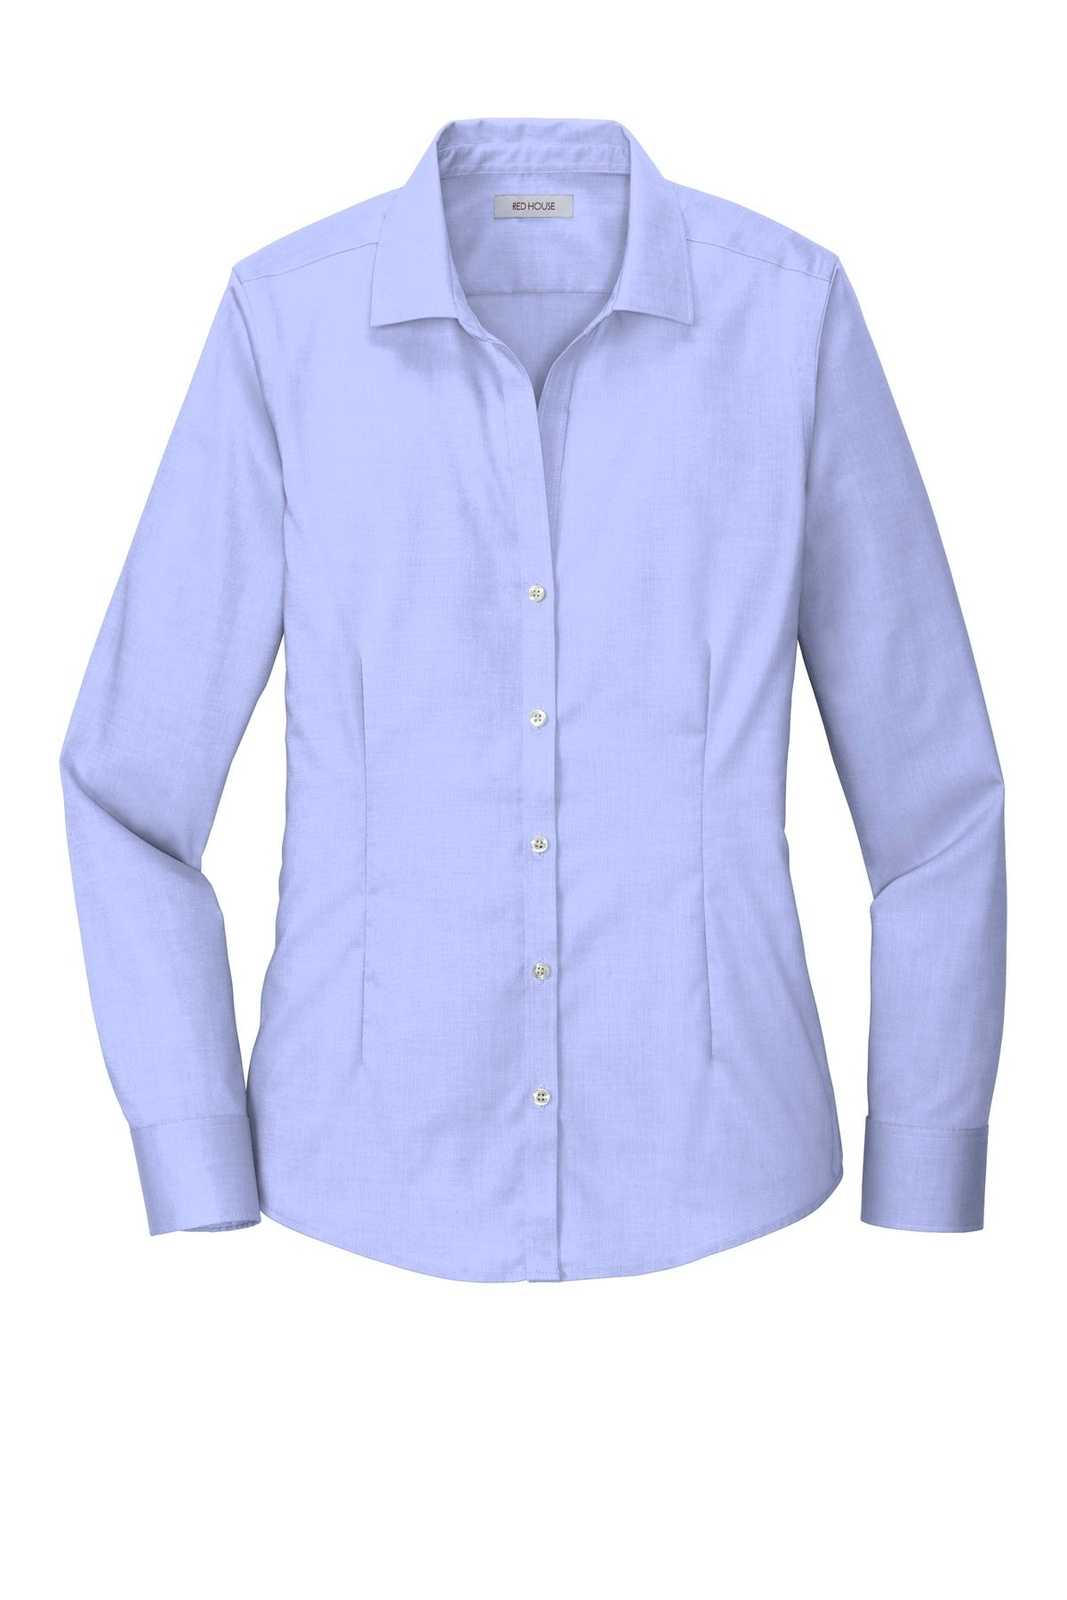 Red House RH250 Ladies Pinpoint Oxford Non-Iron Shirt - Blue - HIT a Double - 5